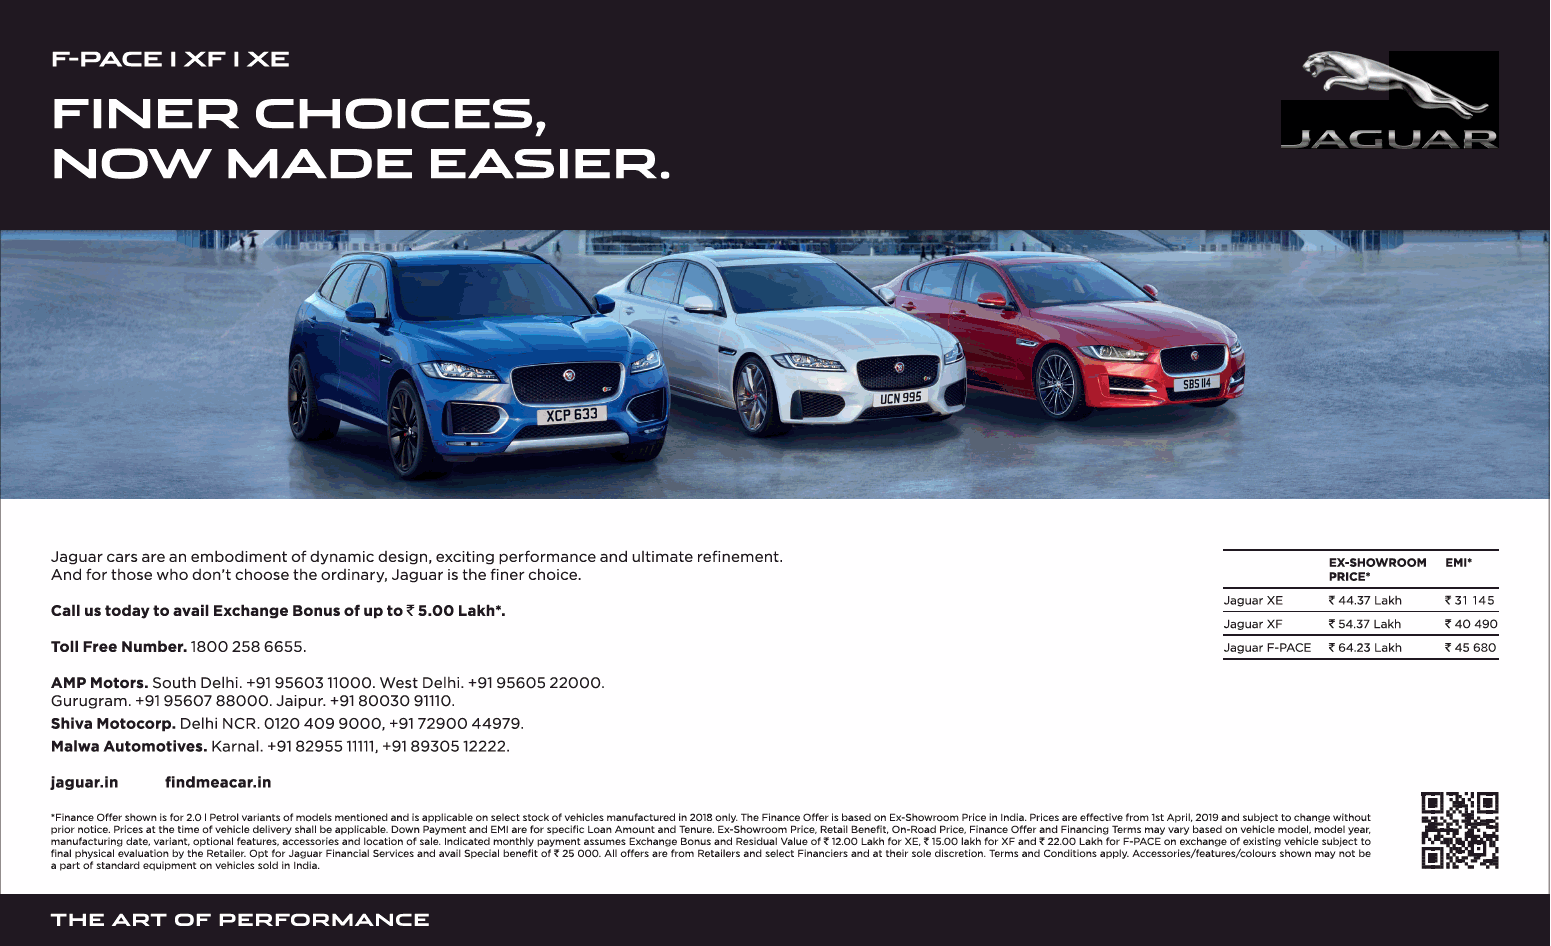 jaguar-finer-choices-now-made-easier-ad-times-of-india-delhi-13-07-2019.png